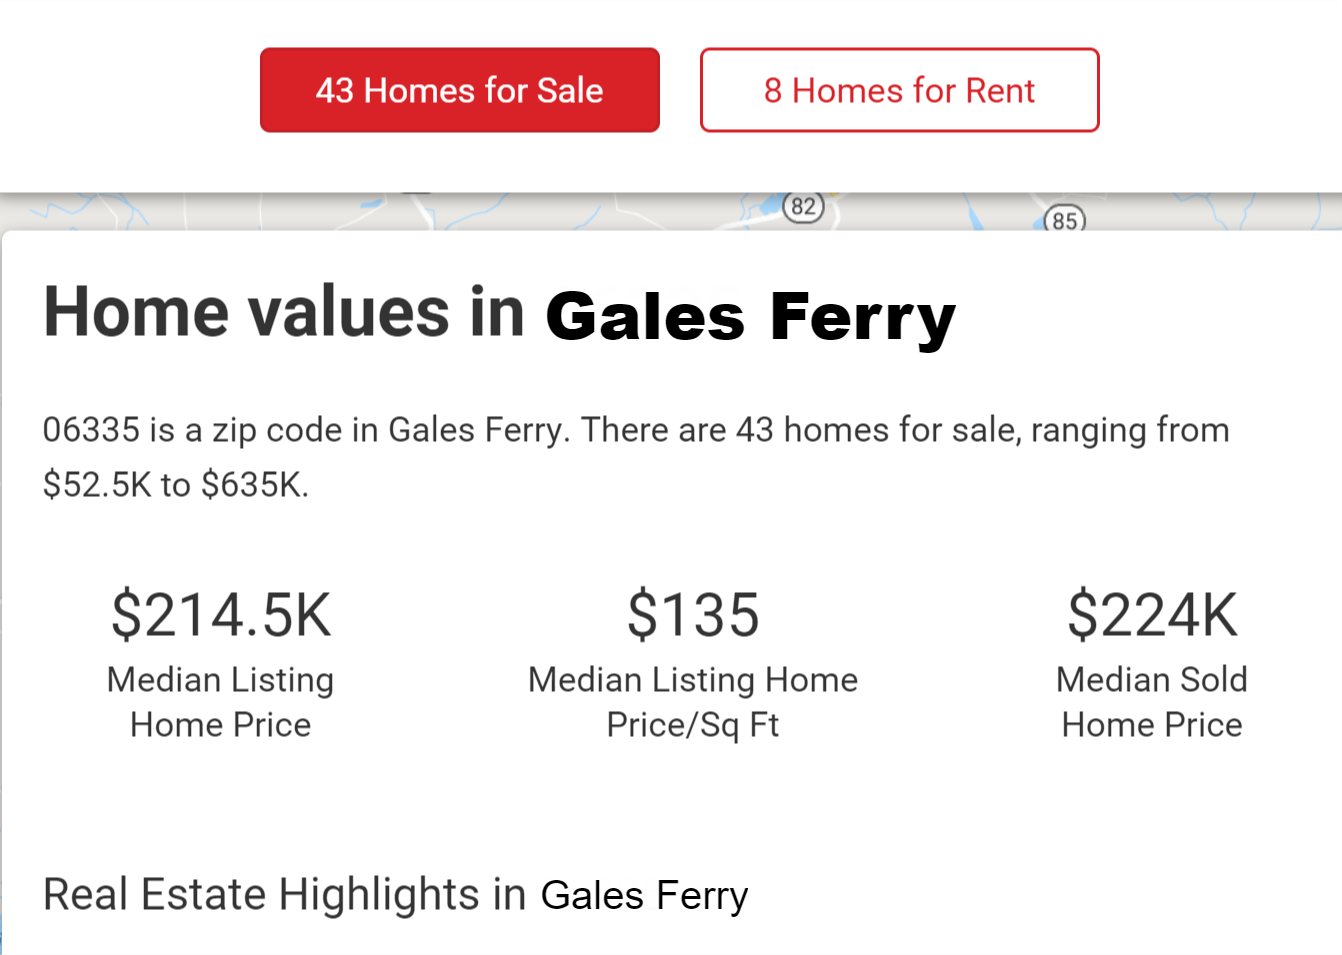 Gales Ferry Real Estate Market Report by Gales Ferry Realtor Bridget Morrissey